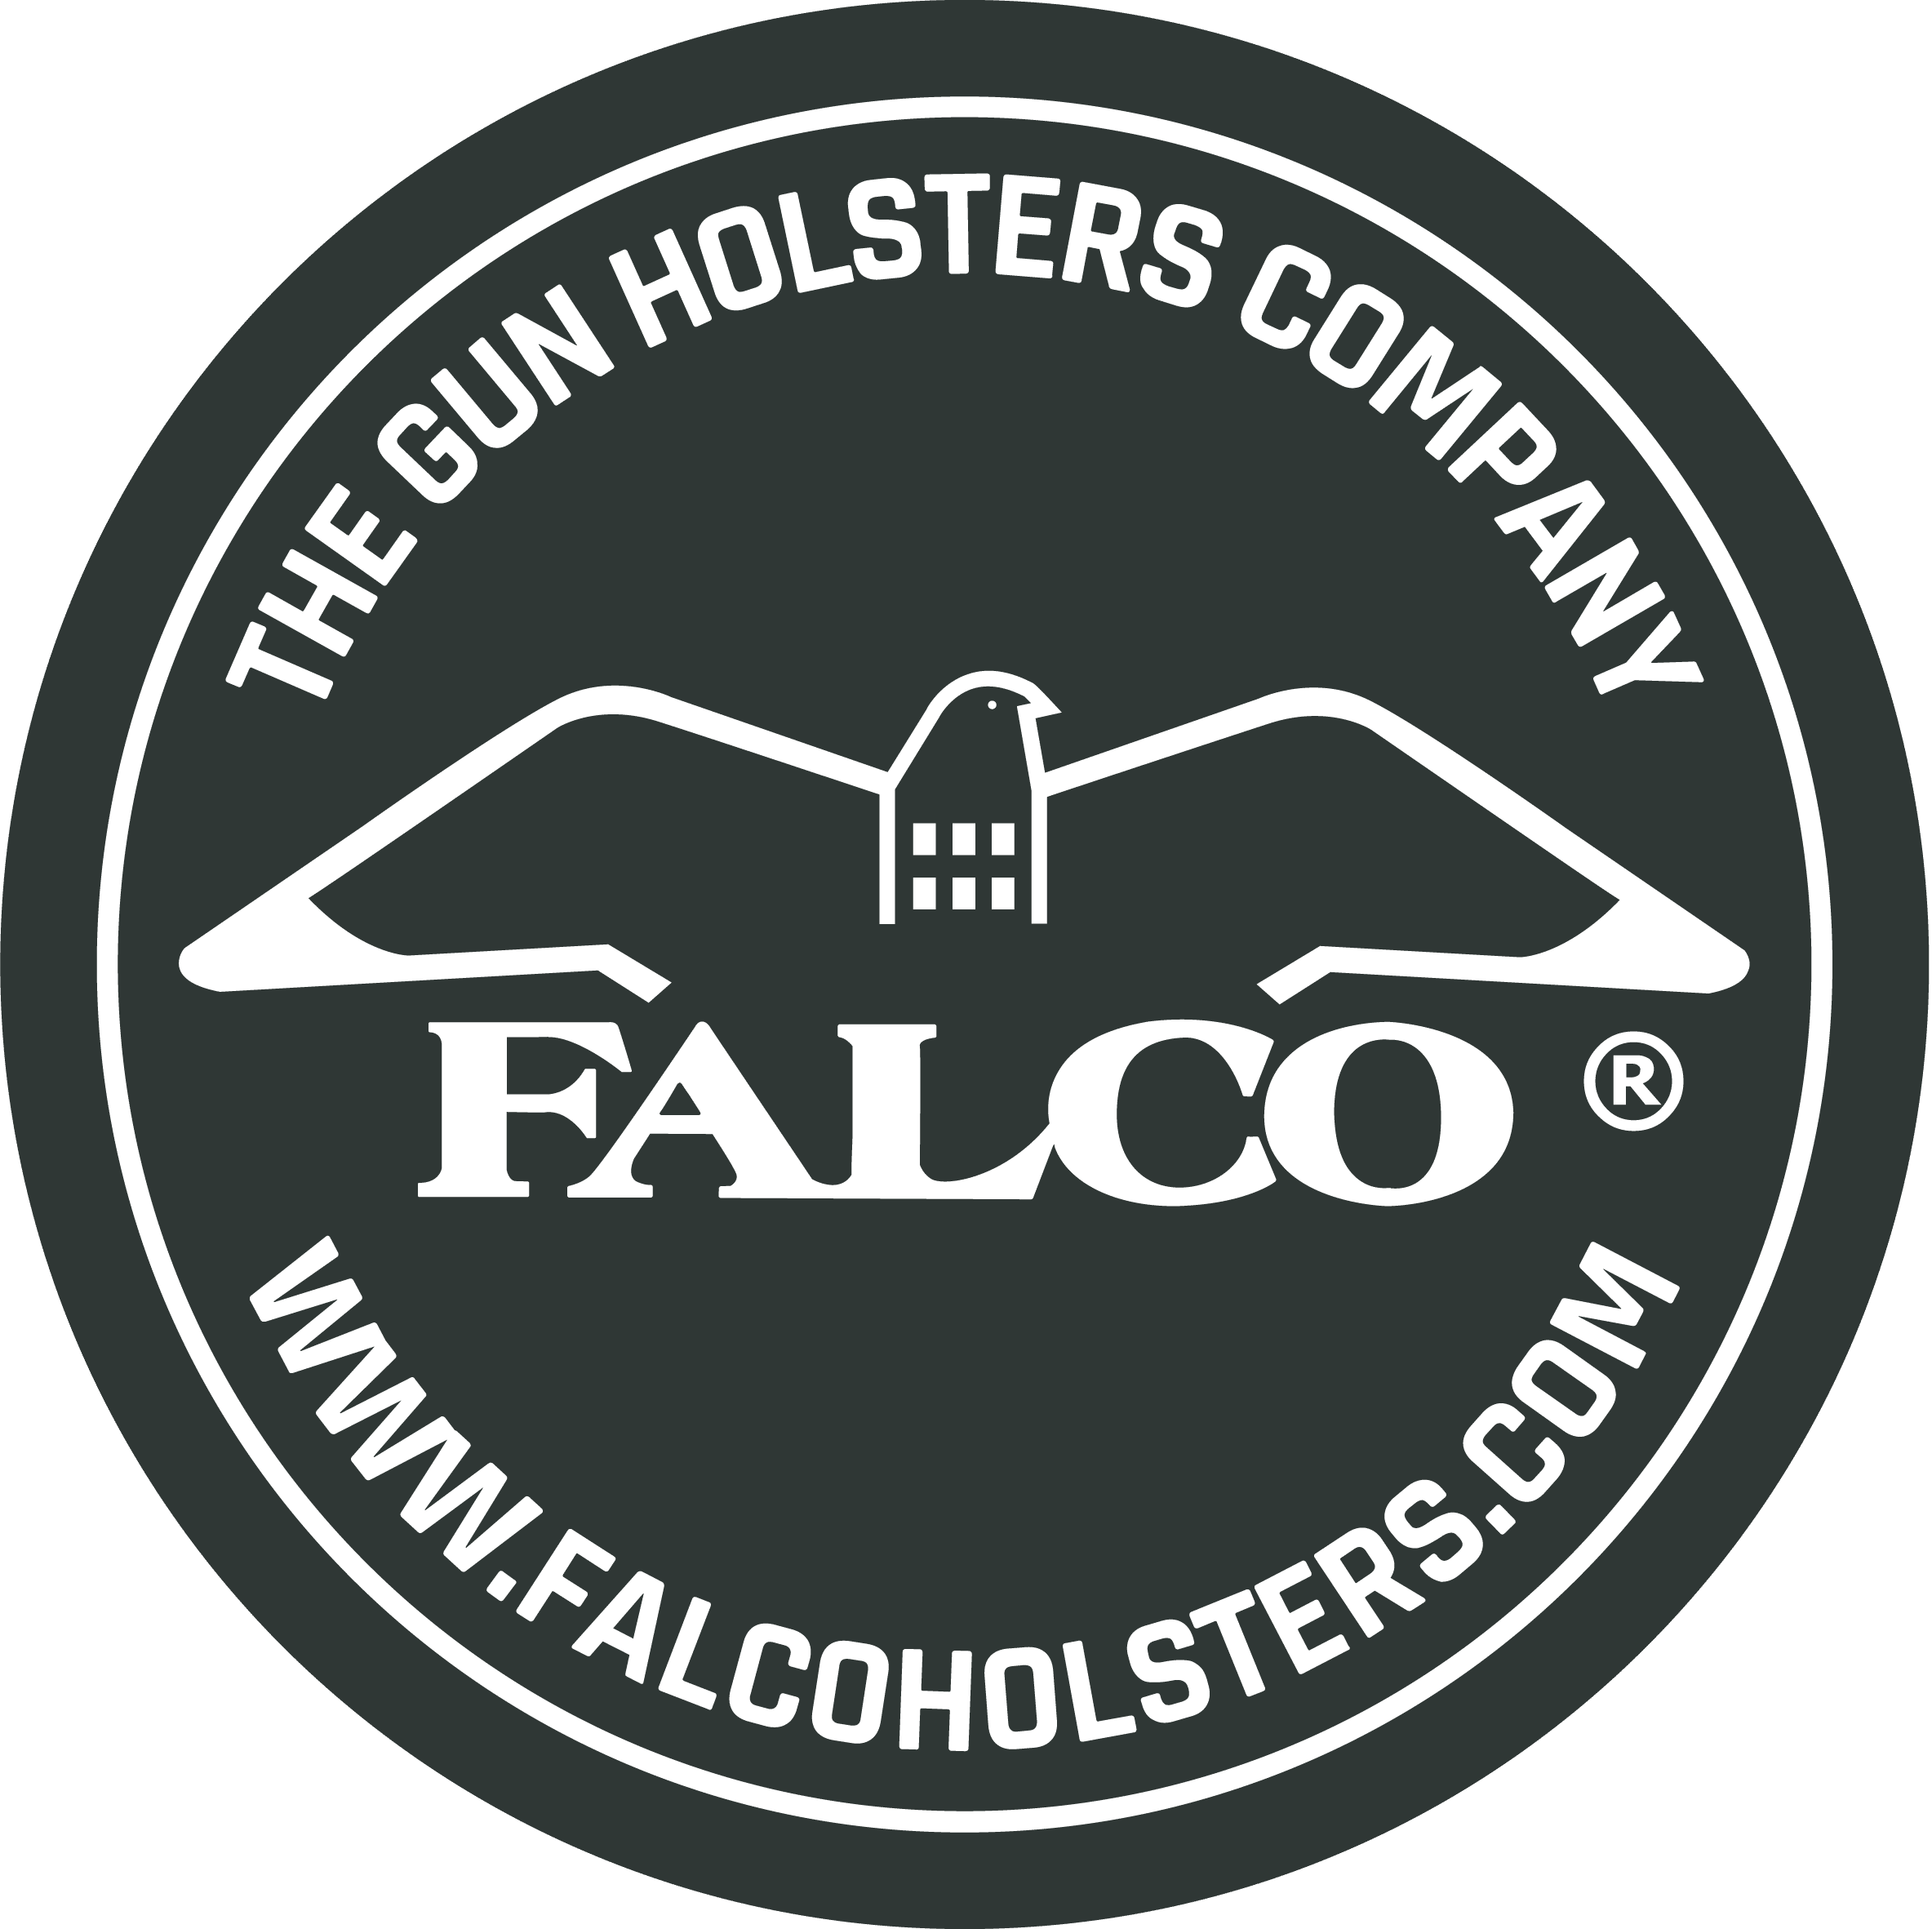 FALCO HOLSTERS